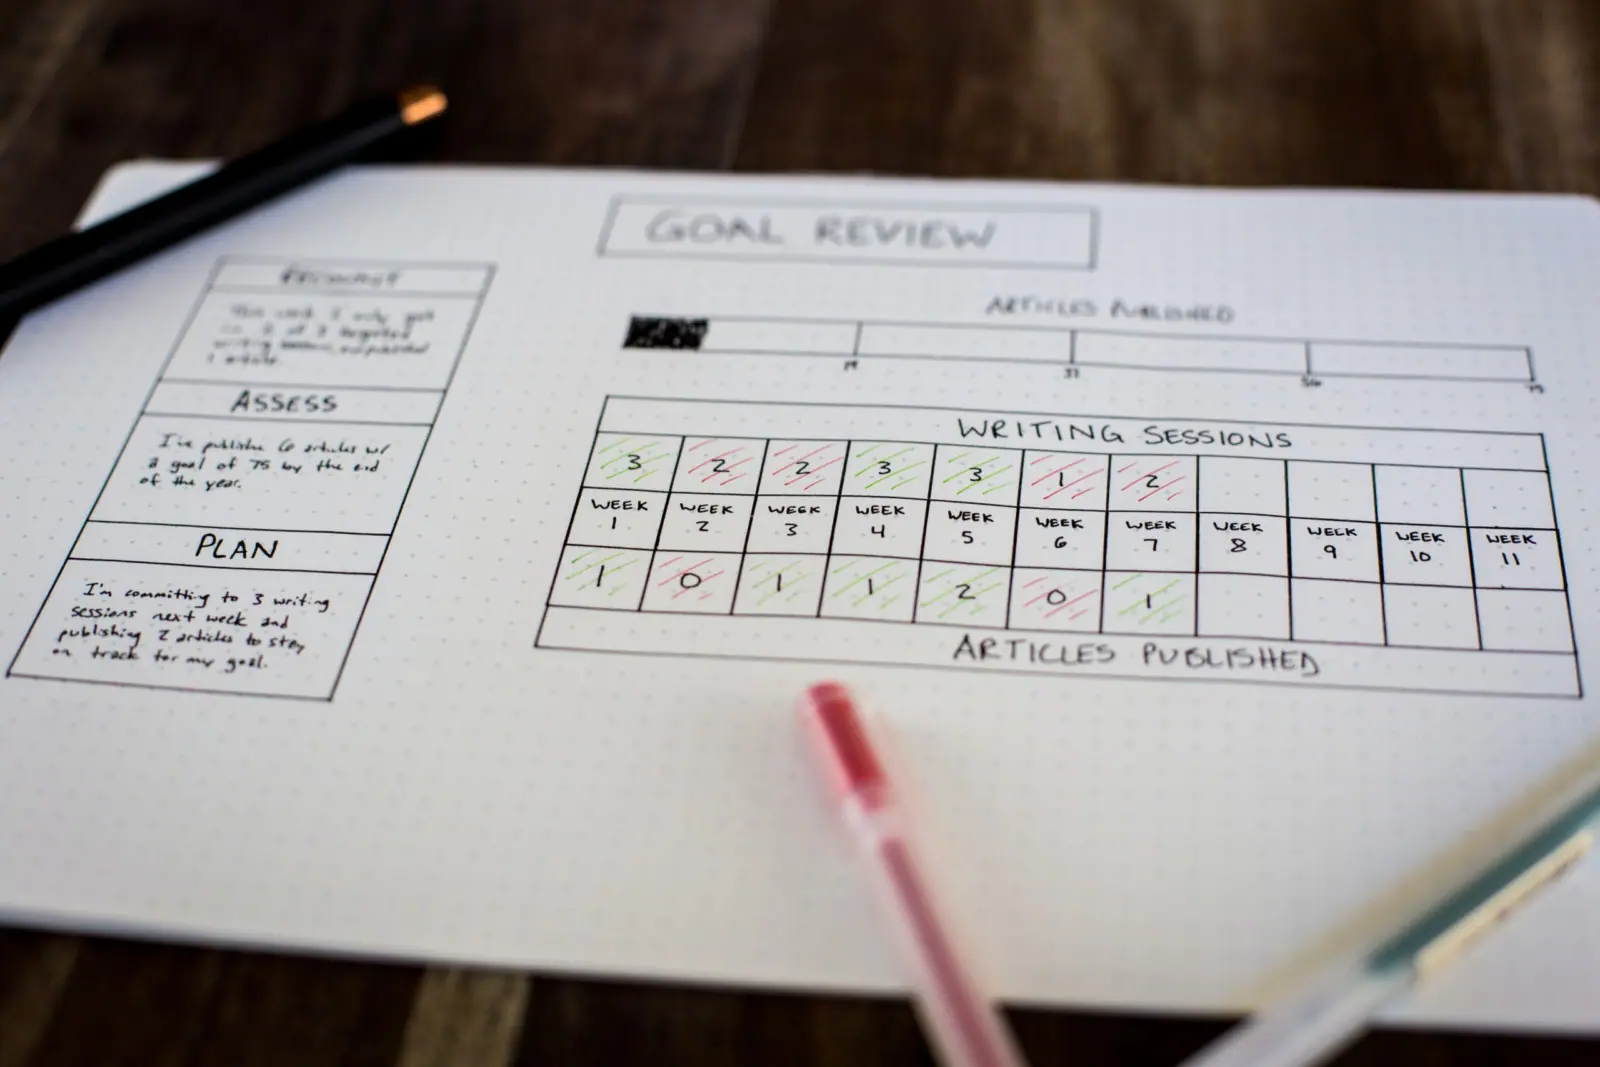 JazzHR’s Performance Review Template